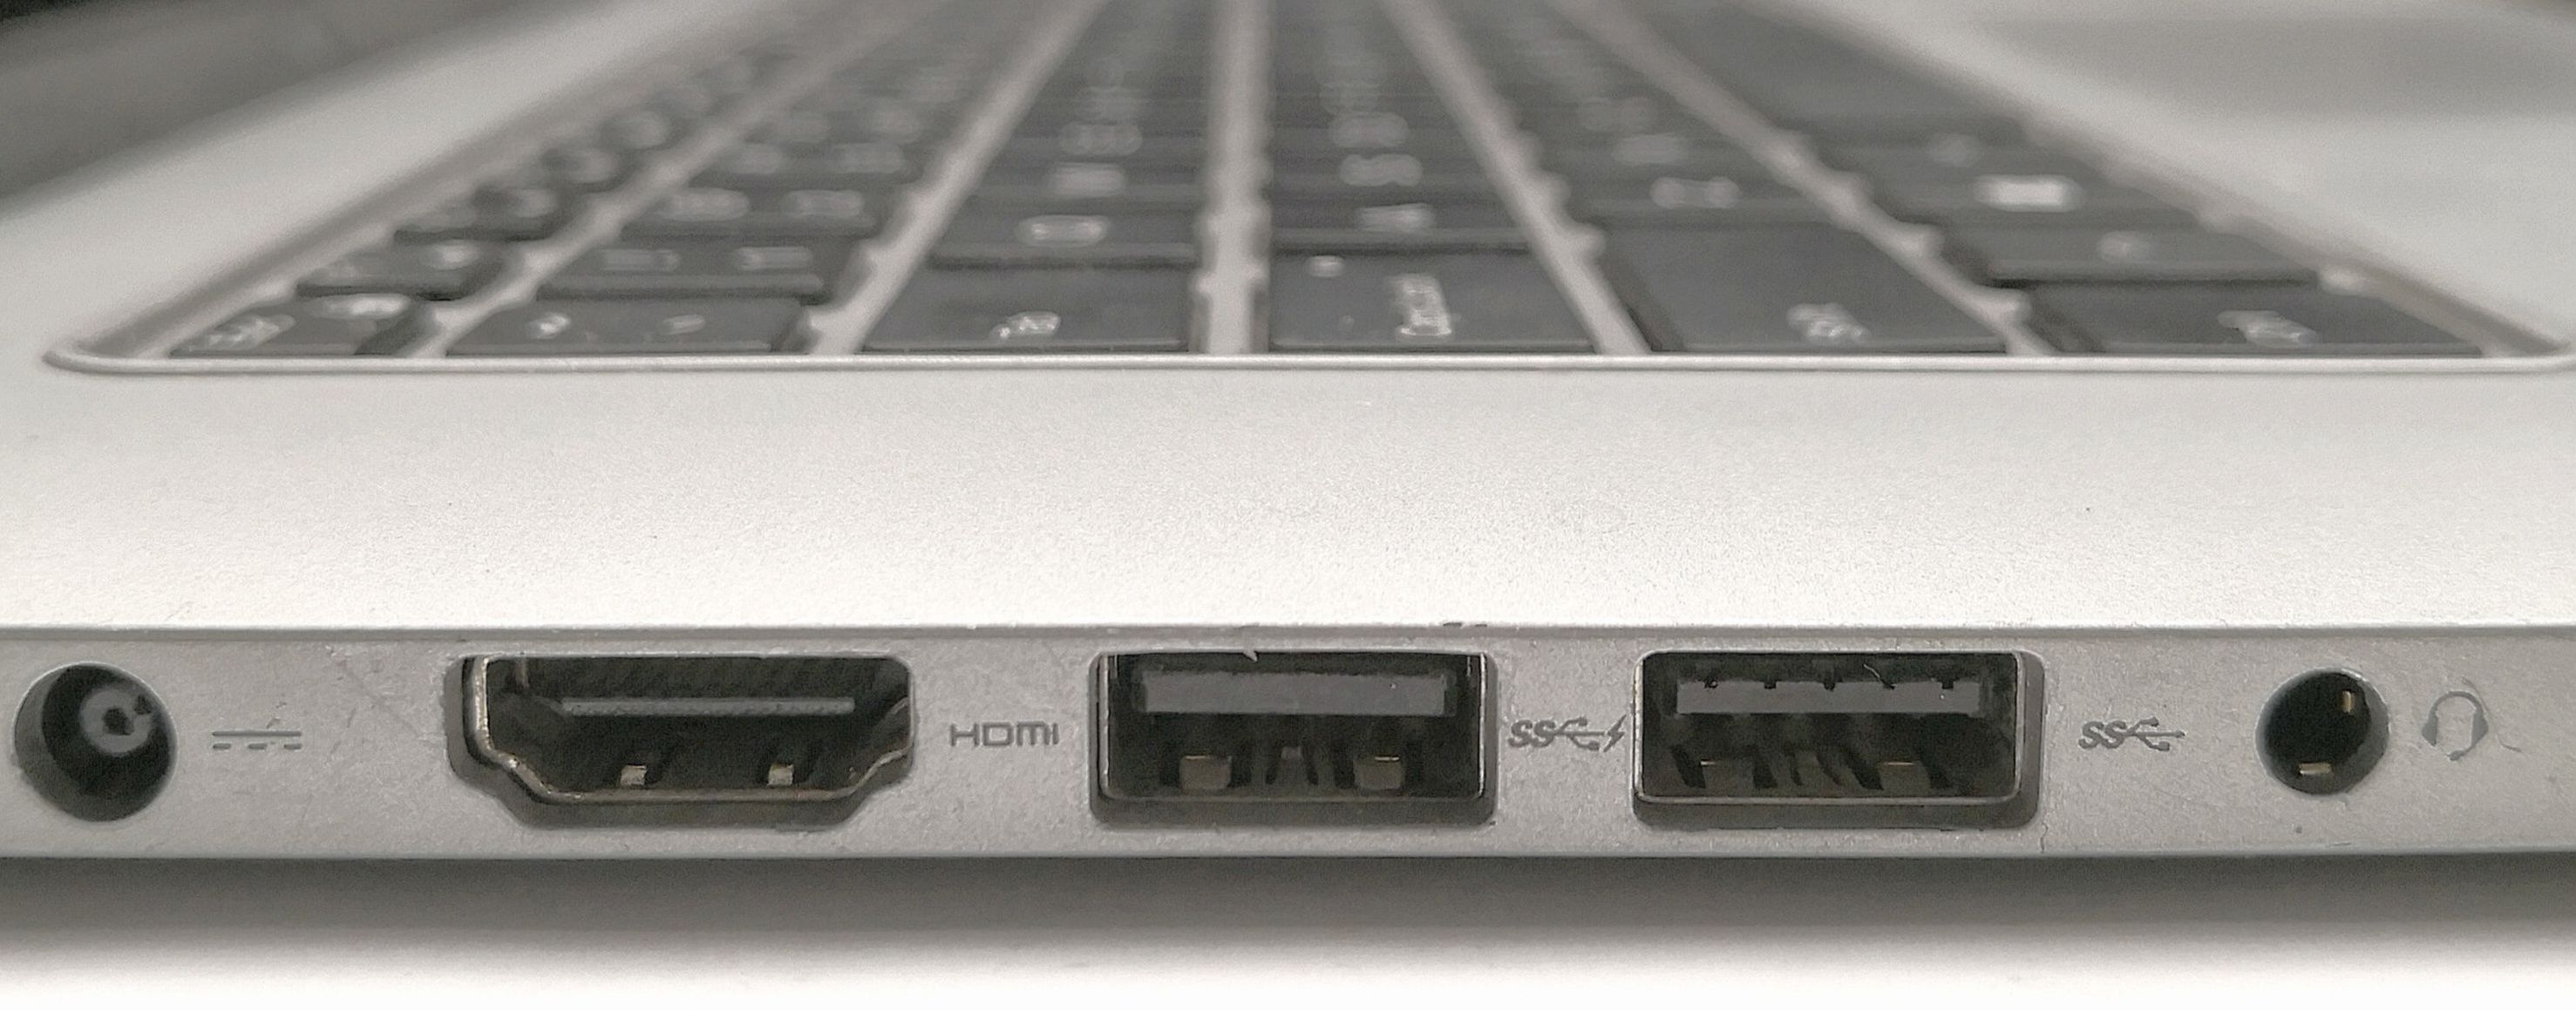 Typical set of ports in a modern laptop: power, HDMI, 2x USB and a 3.5mm jack.